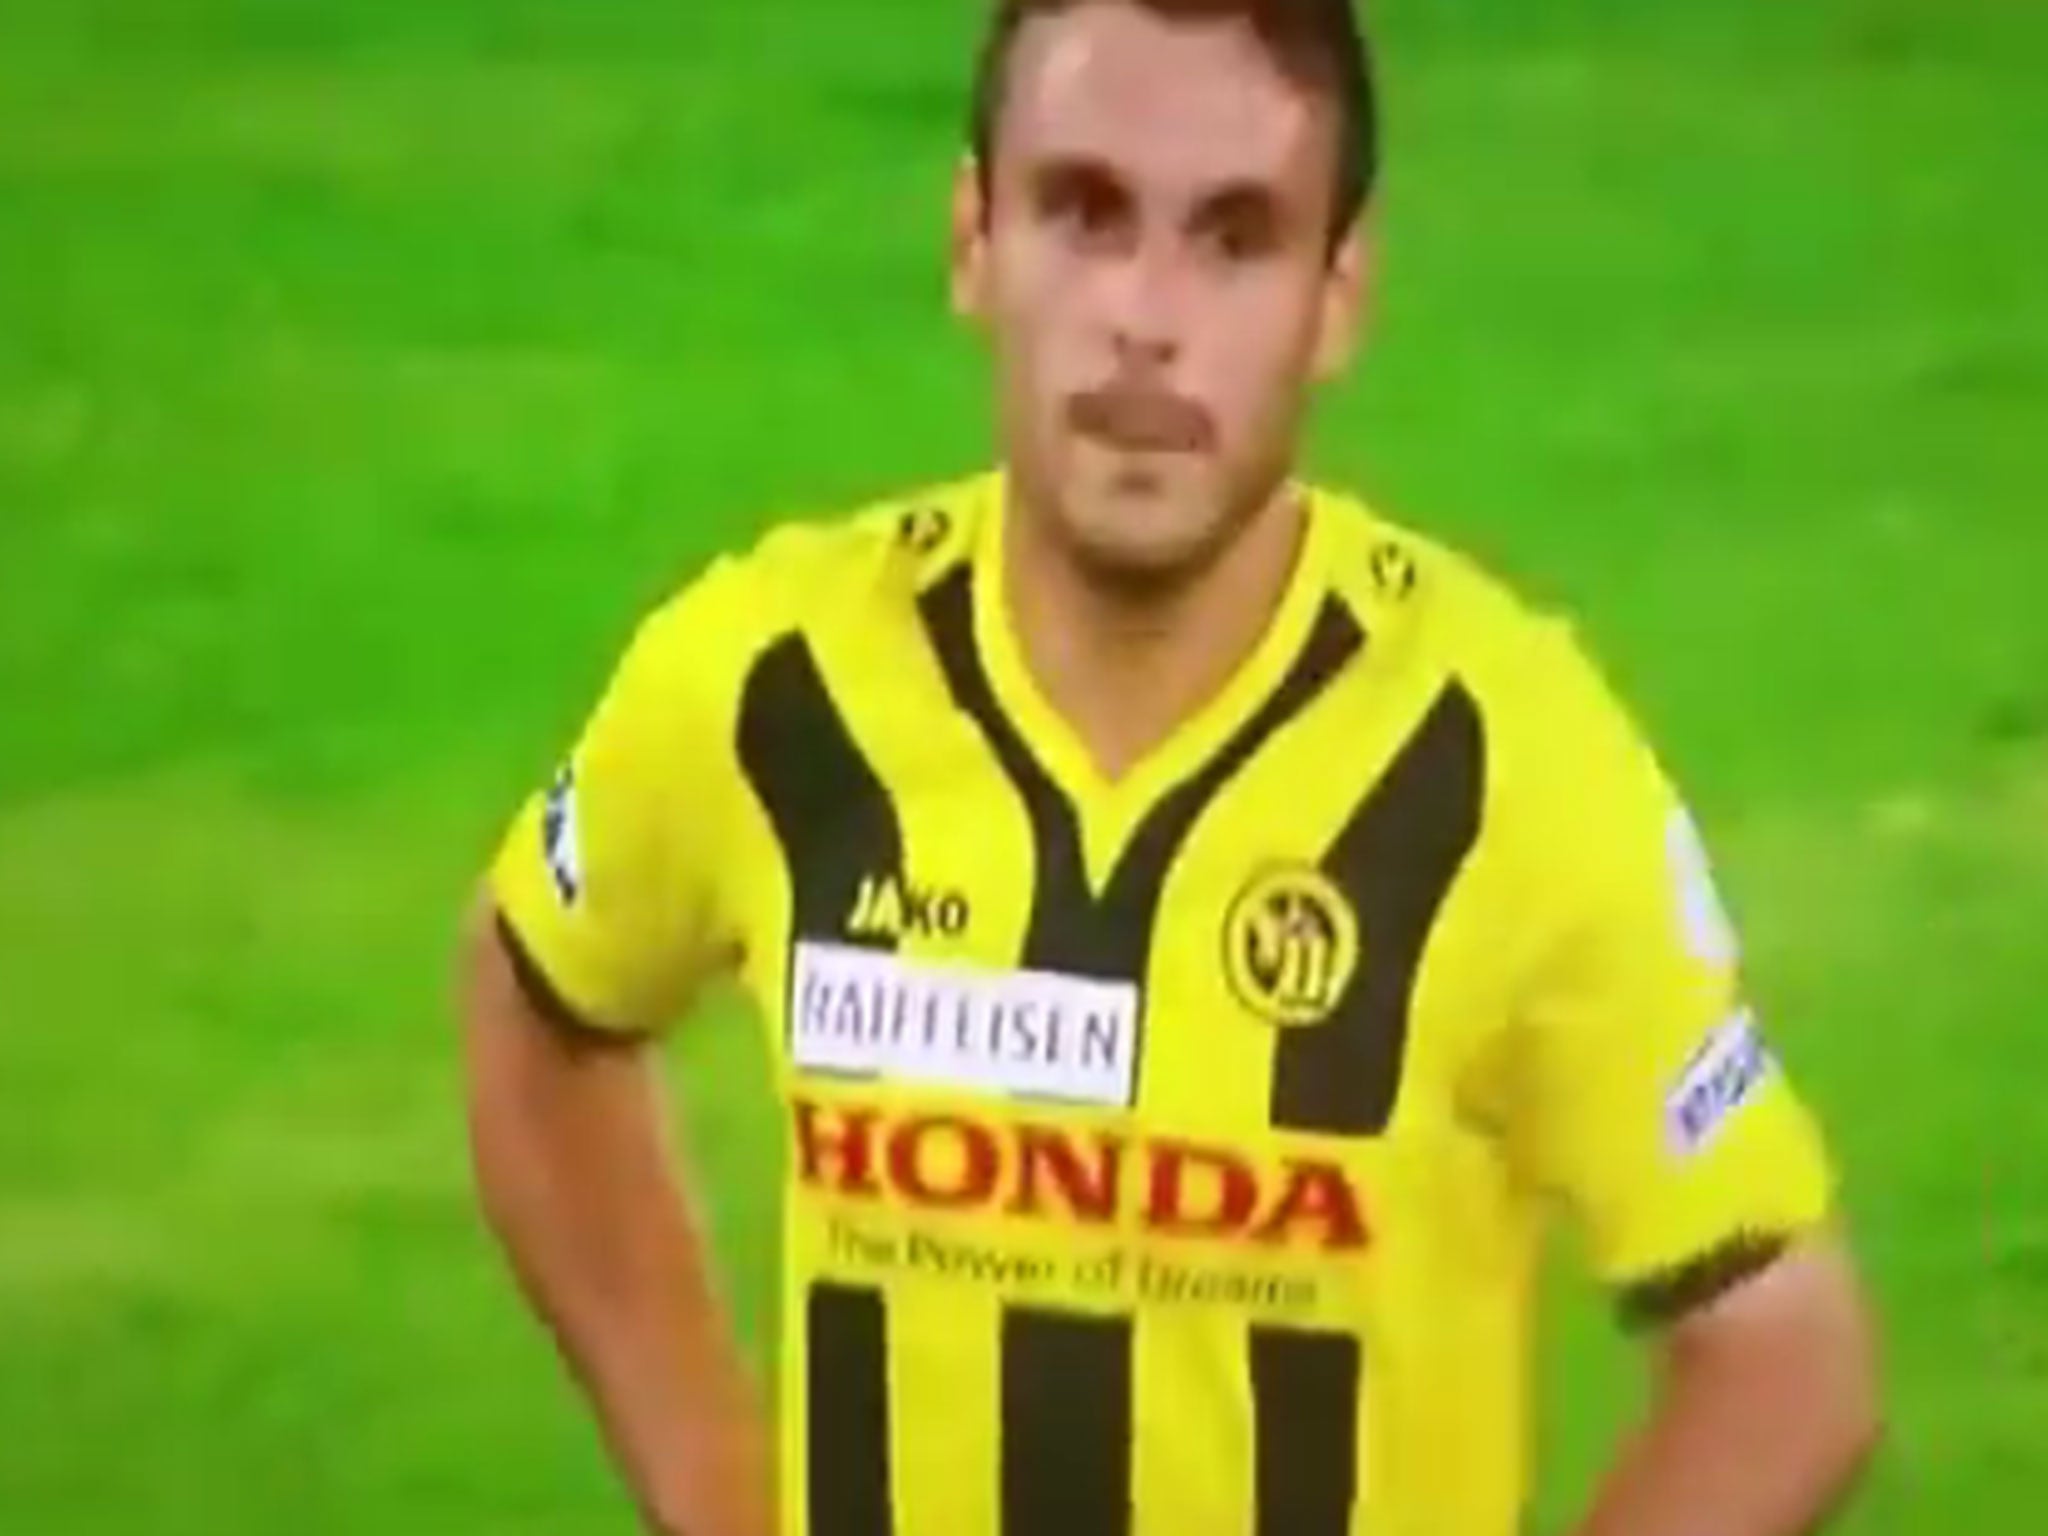 Milan Gajic can't celebrate scoring one of the best goals ever...because it was into his own net